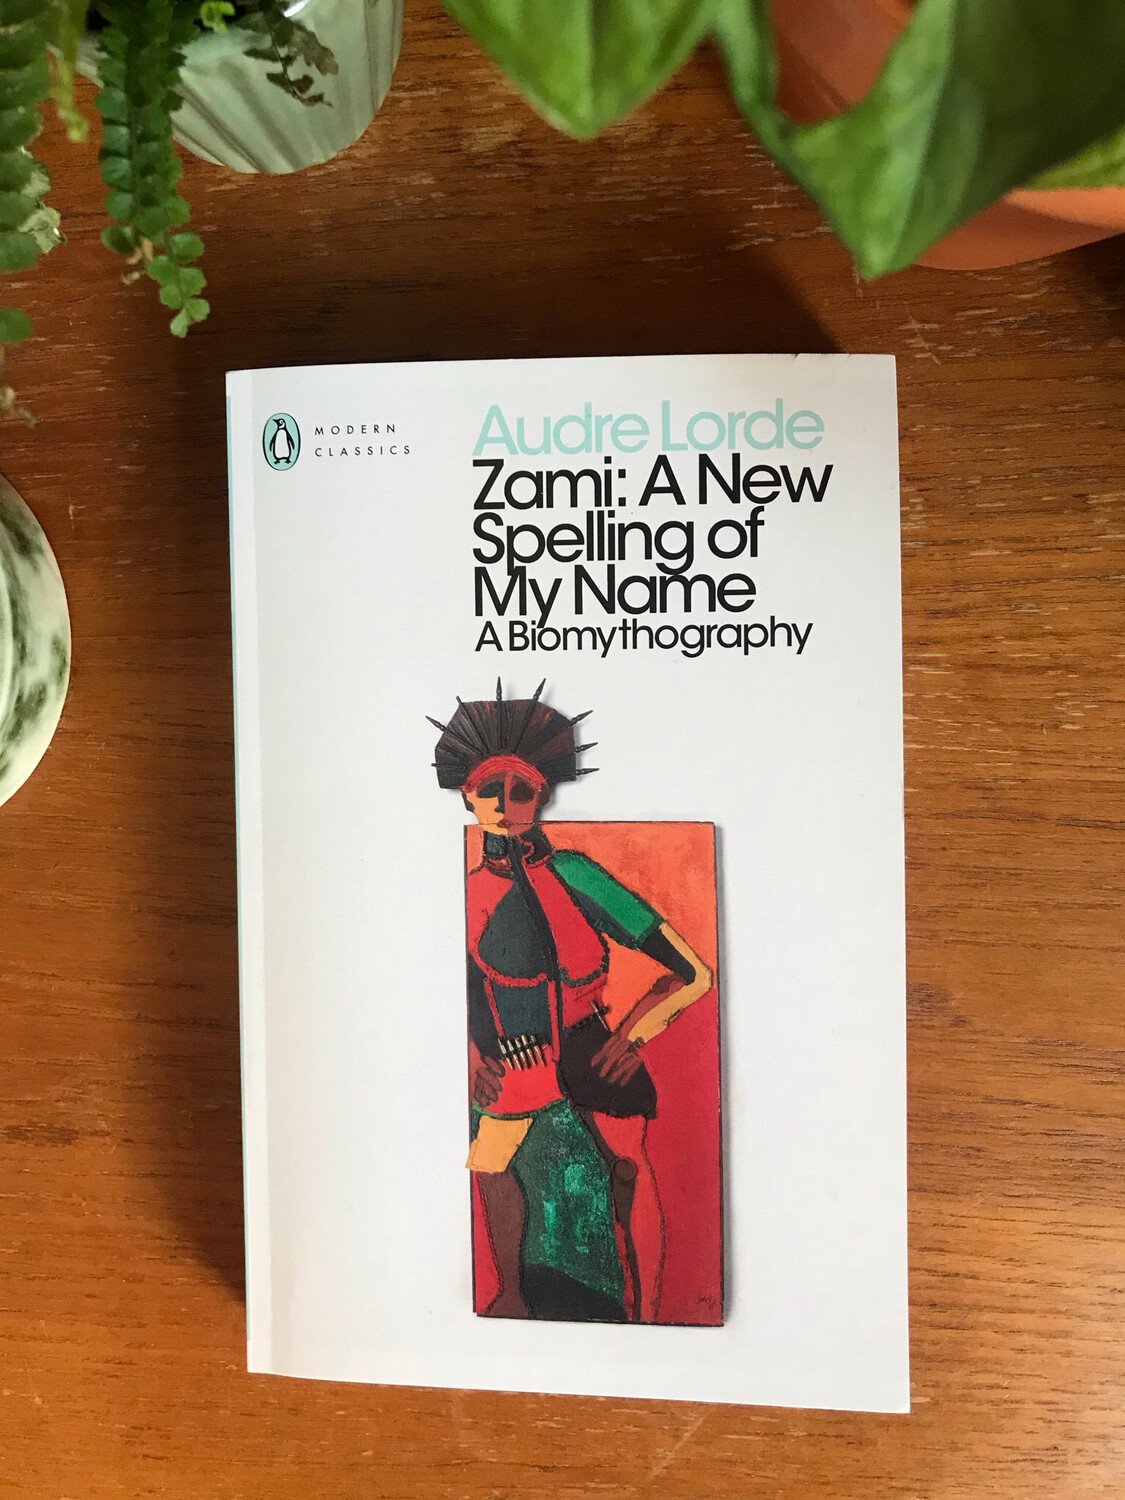 Zami: A New Spelling Of My Name By Audre Lorde